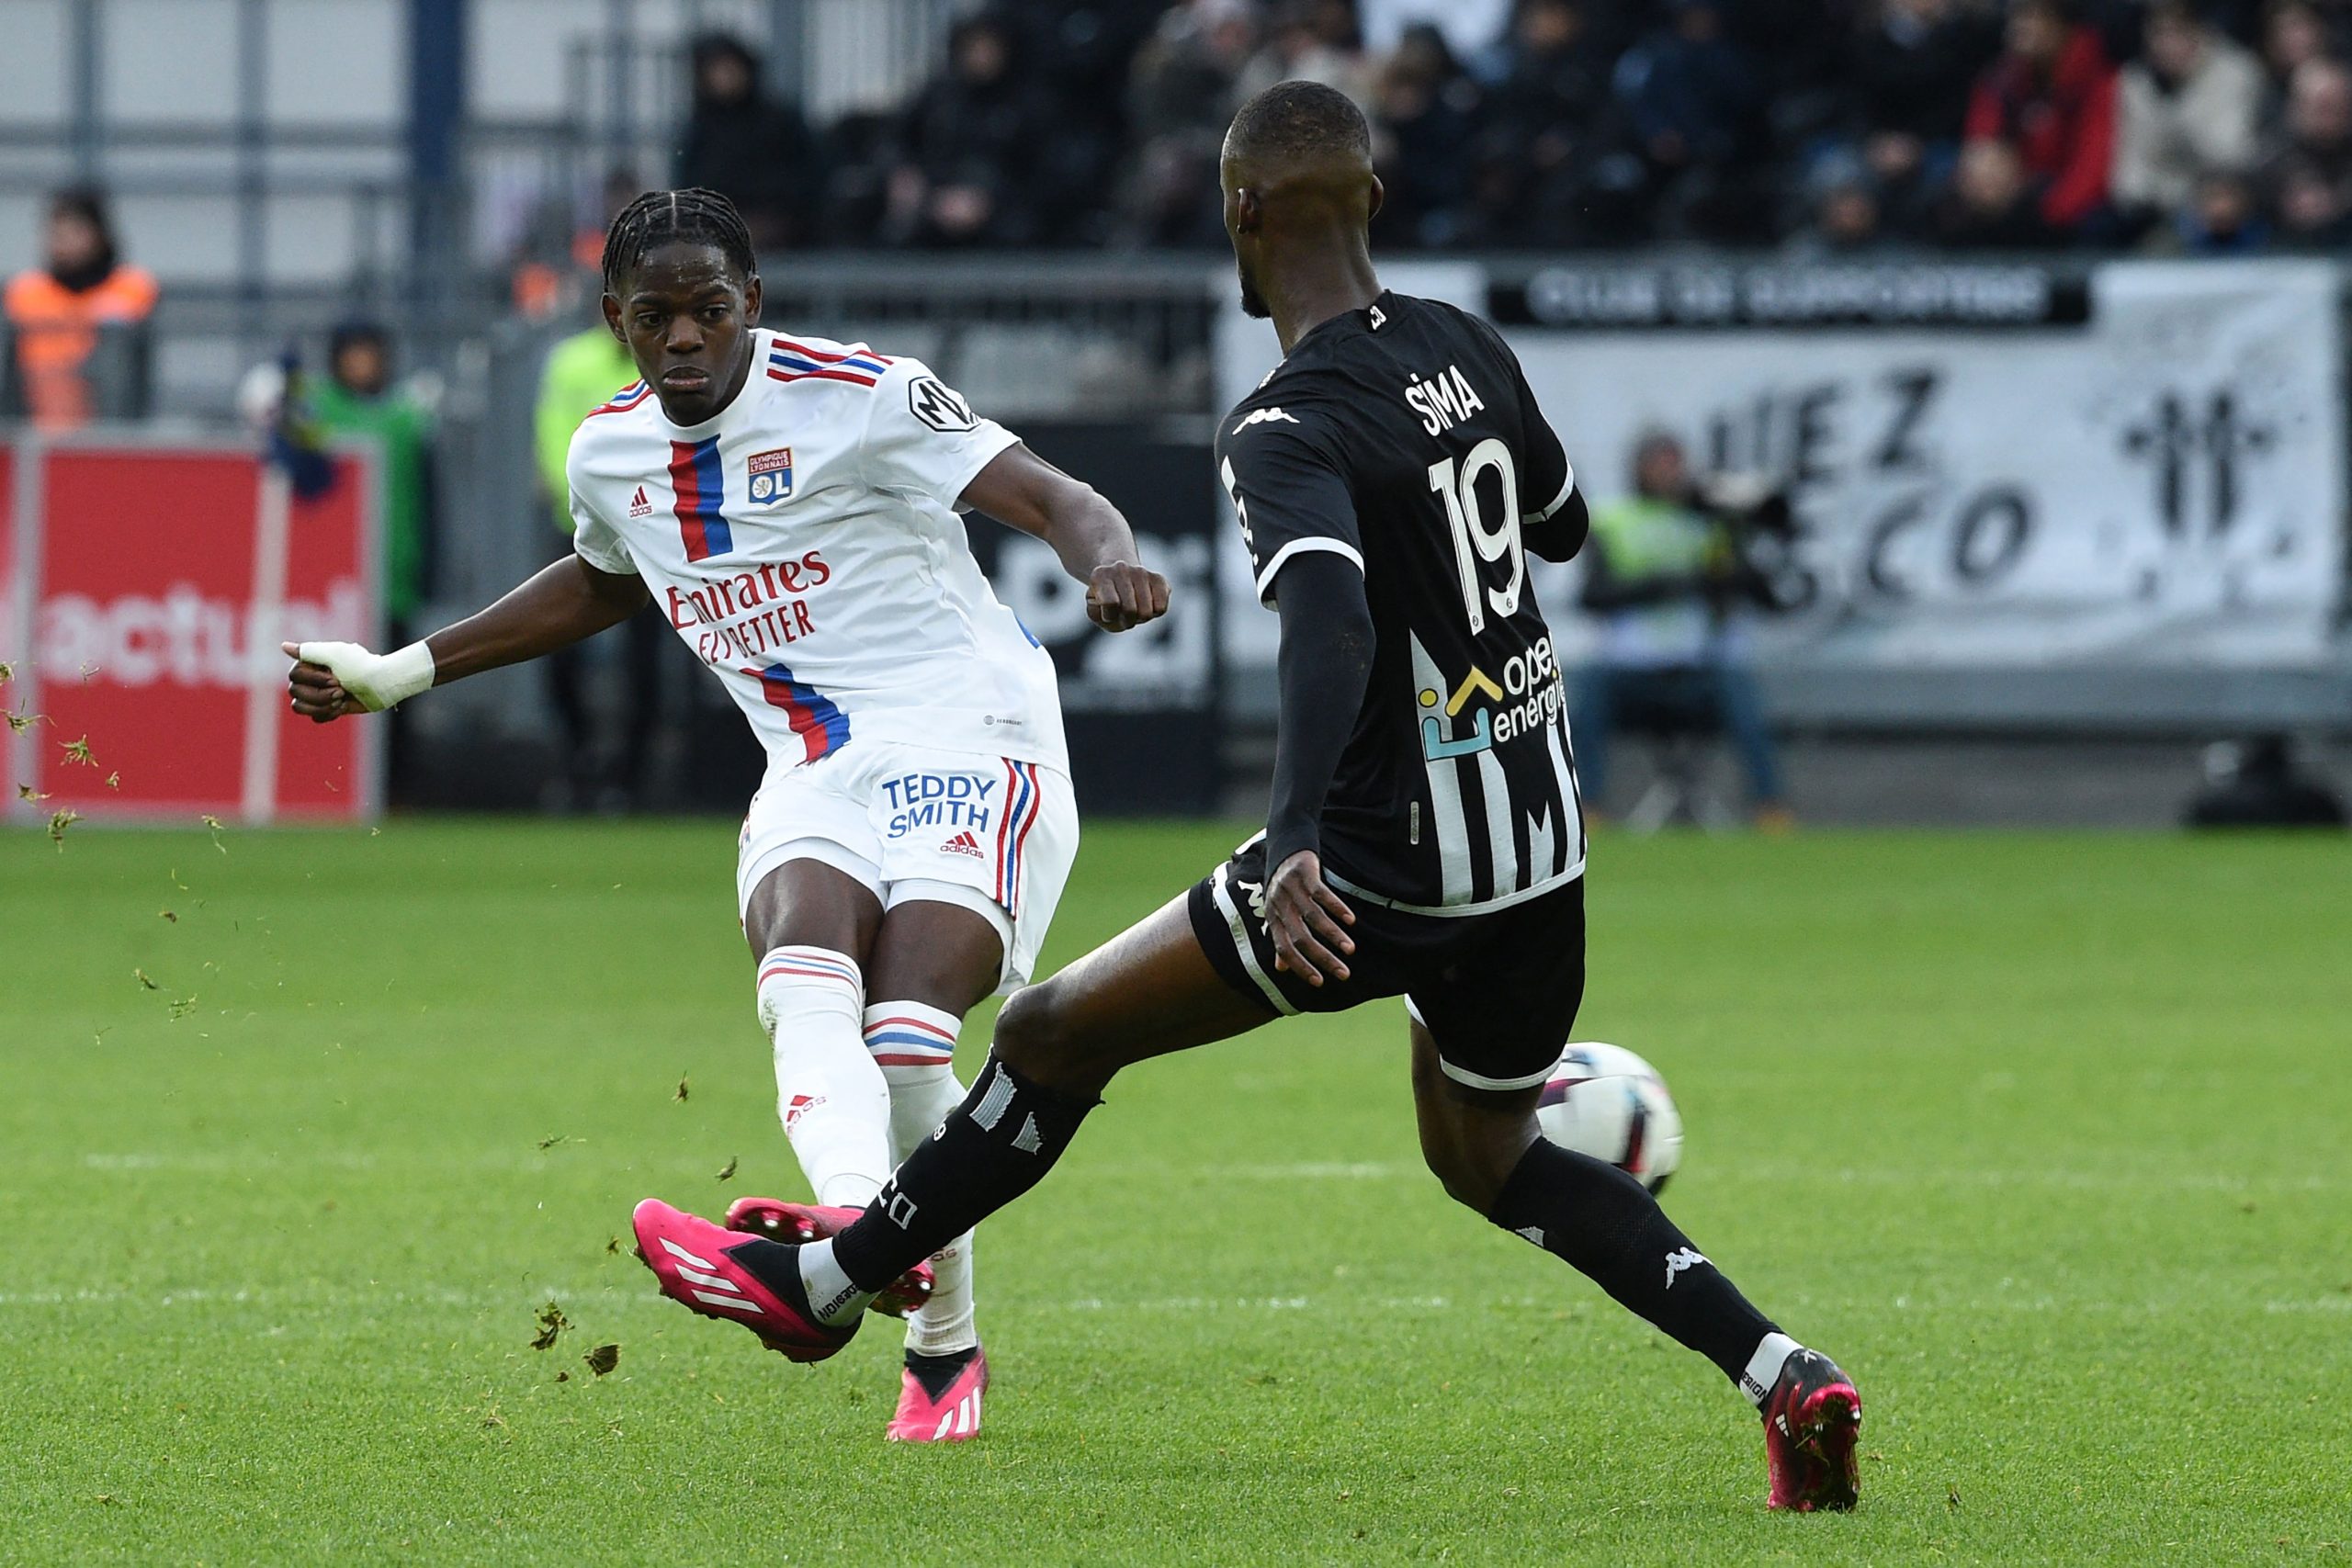 Lyon's French defender Castello Lukeba (L) fights for the ball with Angers' Senegalese forward Abdallah Sima (R).